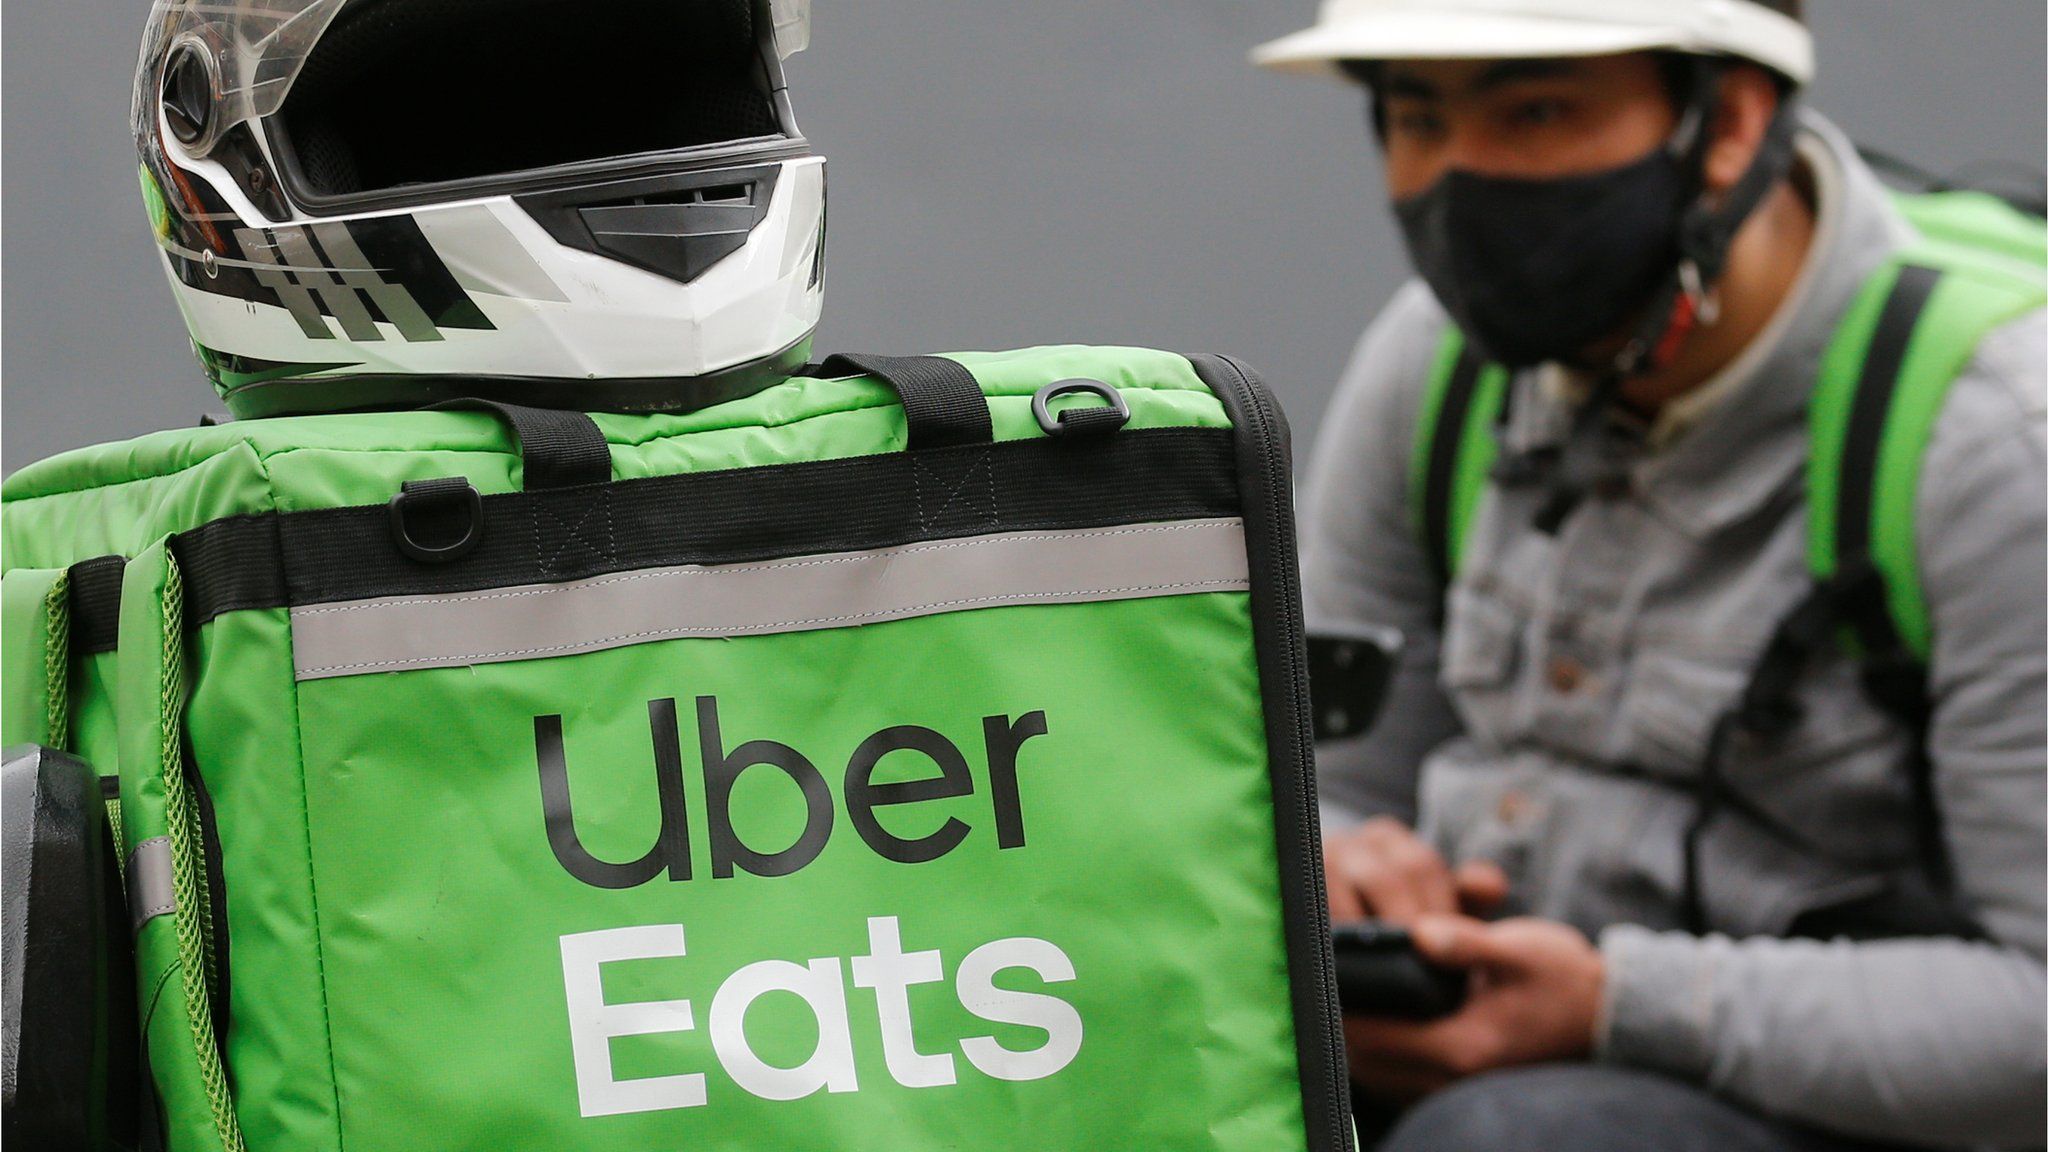 An Uber Eats food delivery courier wearing a protective face mask waits for an order amid the outbreak of the coronavirus disease (COVID-19) in central Kiev, Ukraine May 27, 2020